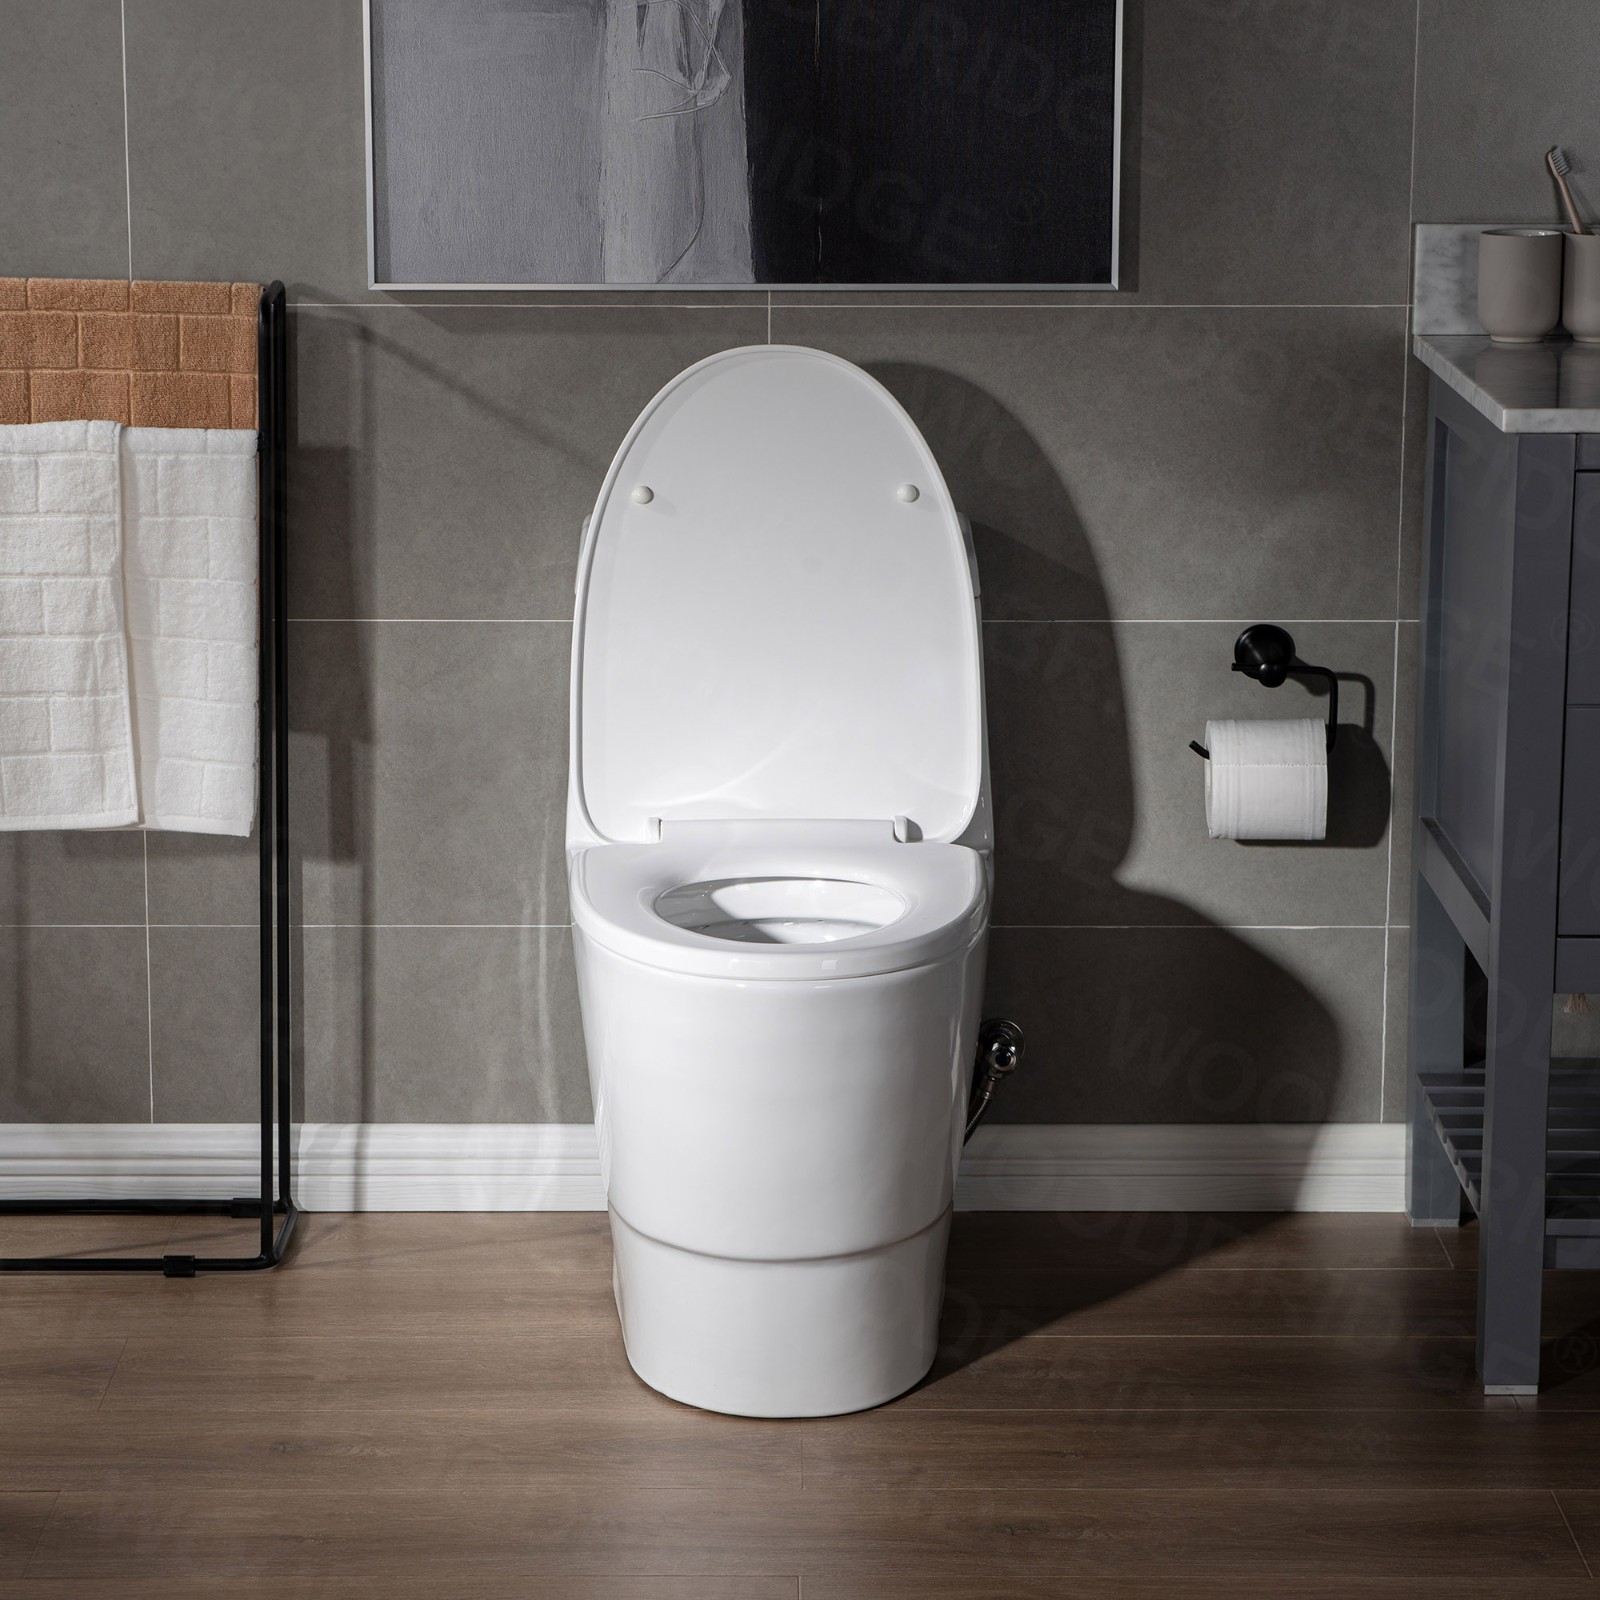  WOODBRIDGEE One Piece Toilet with Soft Closing Seat, Chair Height, 1.28 GPF Dual, Water Sensed, 1000 Gram MaP Flushing Score Toilet with Matte Black Button T0001-MB, White_7666